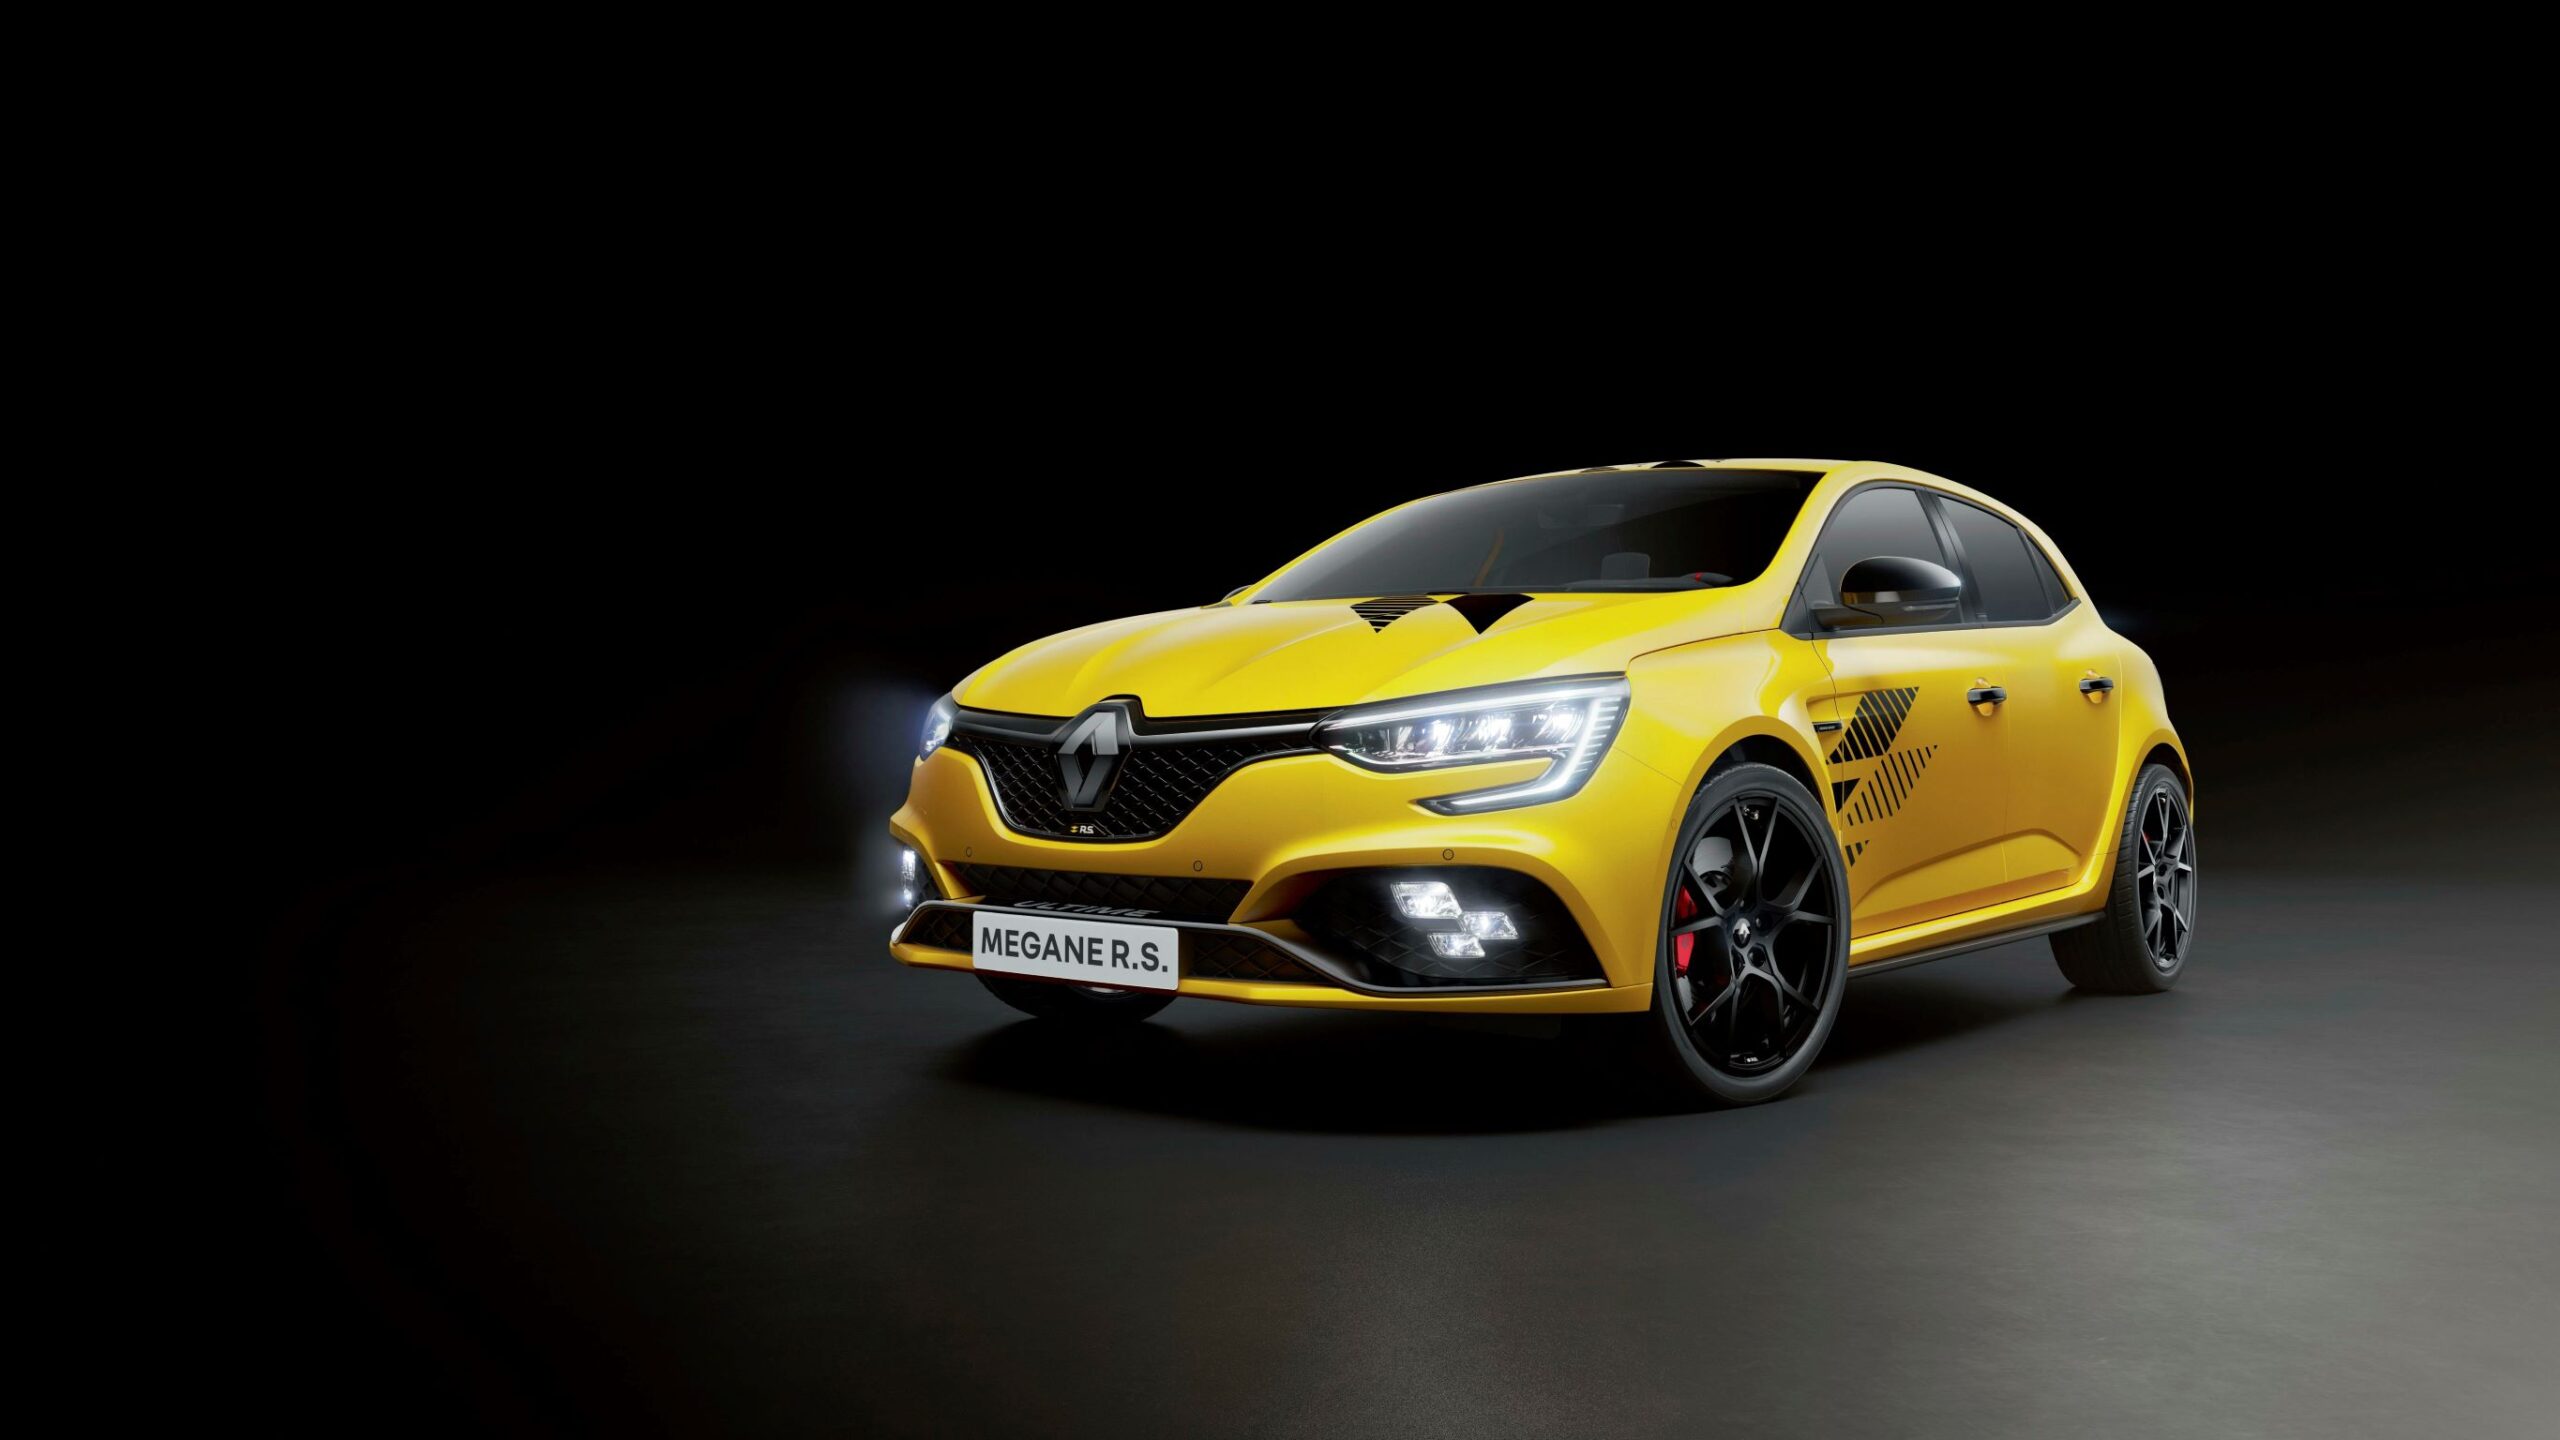 Front three quarters view of the new Renault Megane R.S. Ultime in yellow